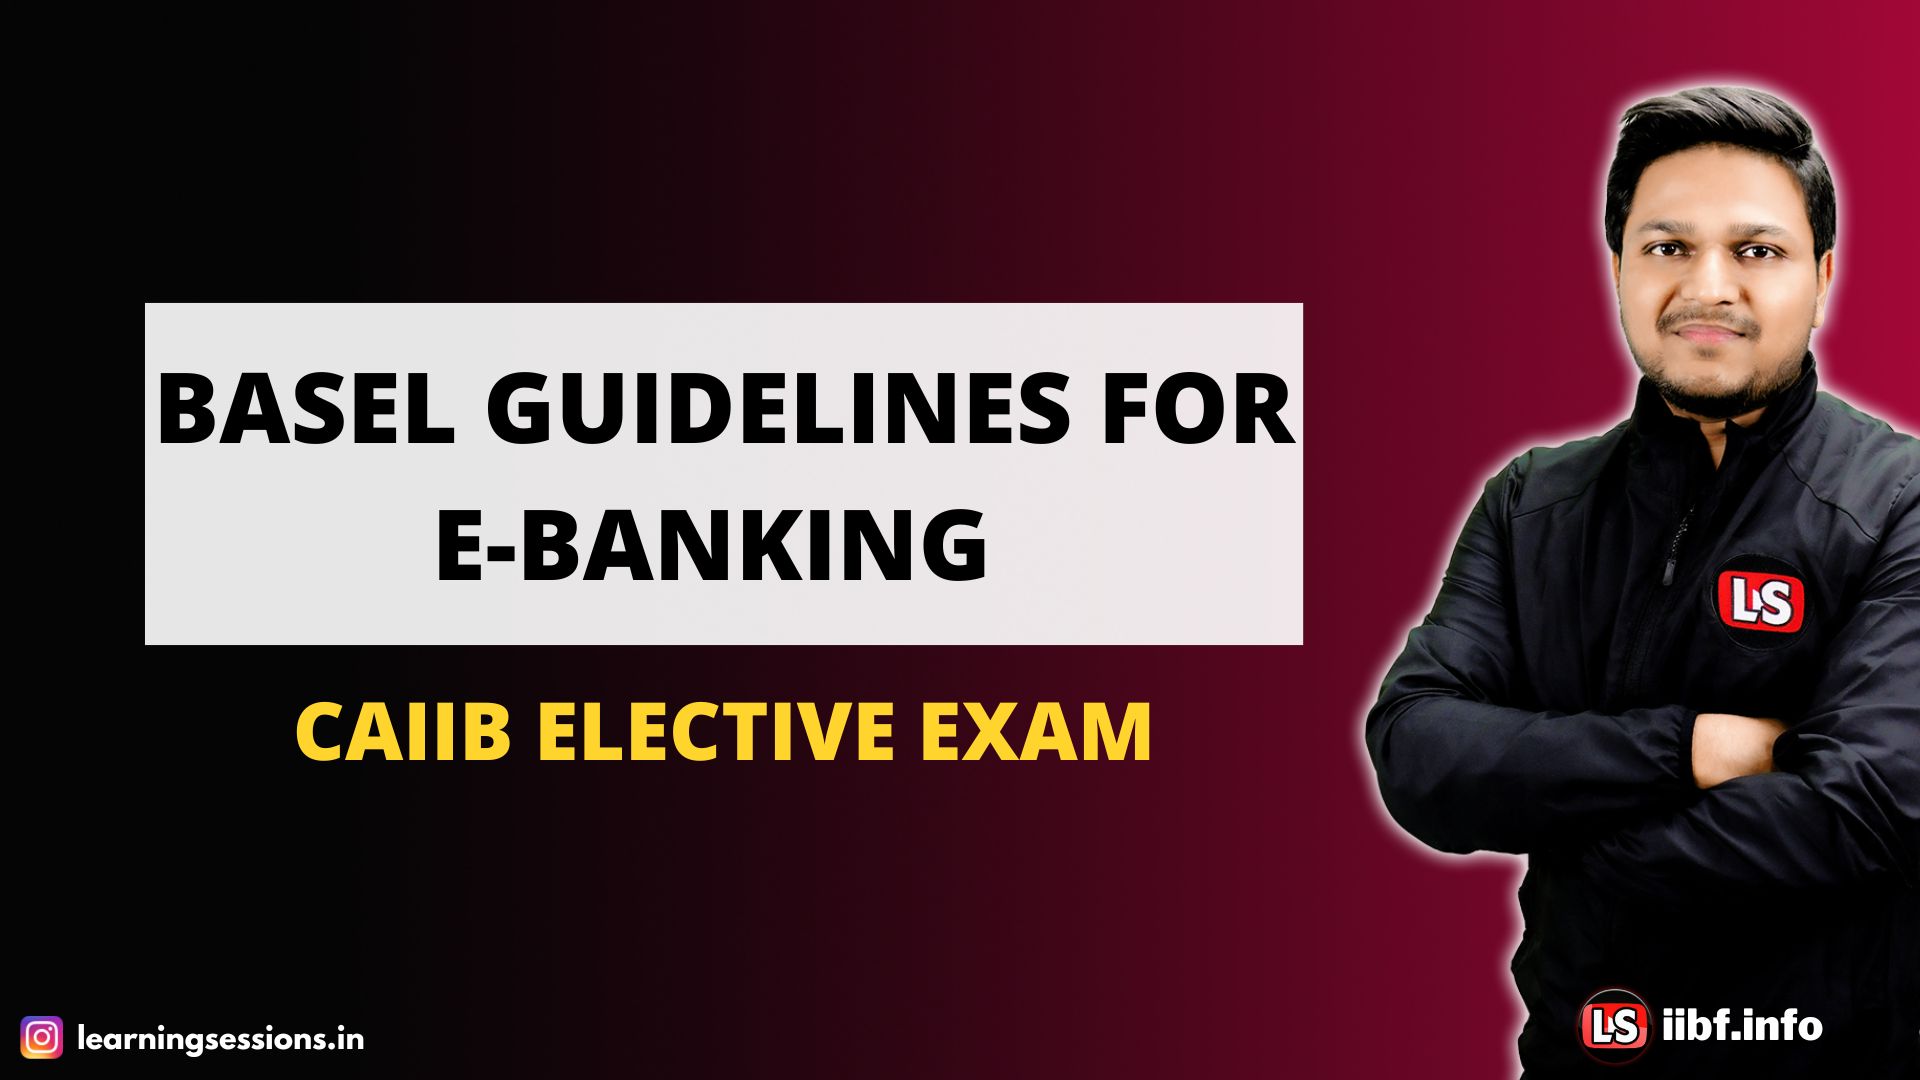 BASEL GUIDELINES FOR E-BANKING | CAIIB ELECTIVE EXAM